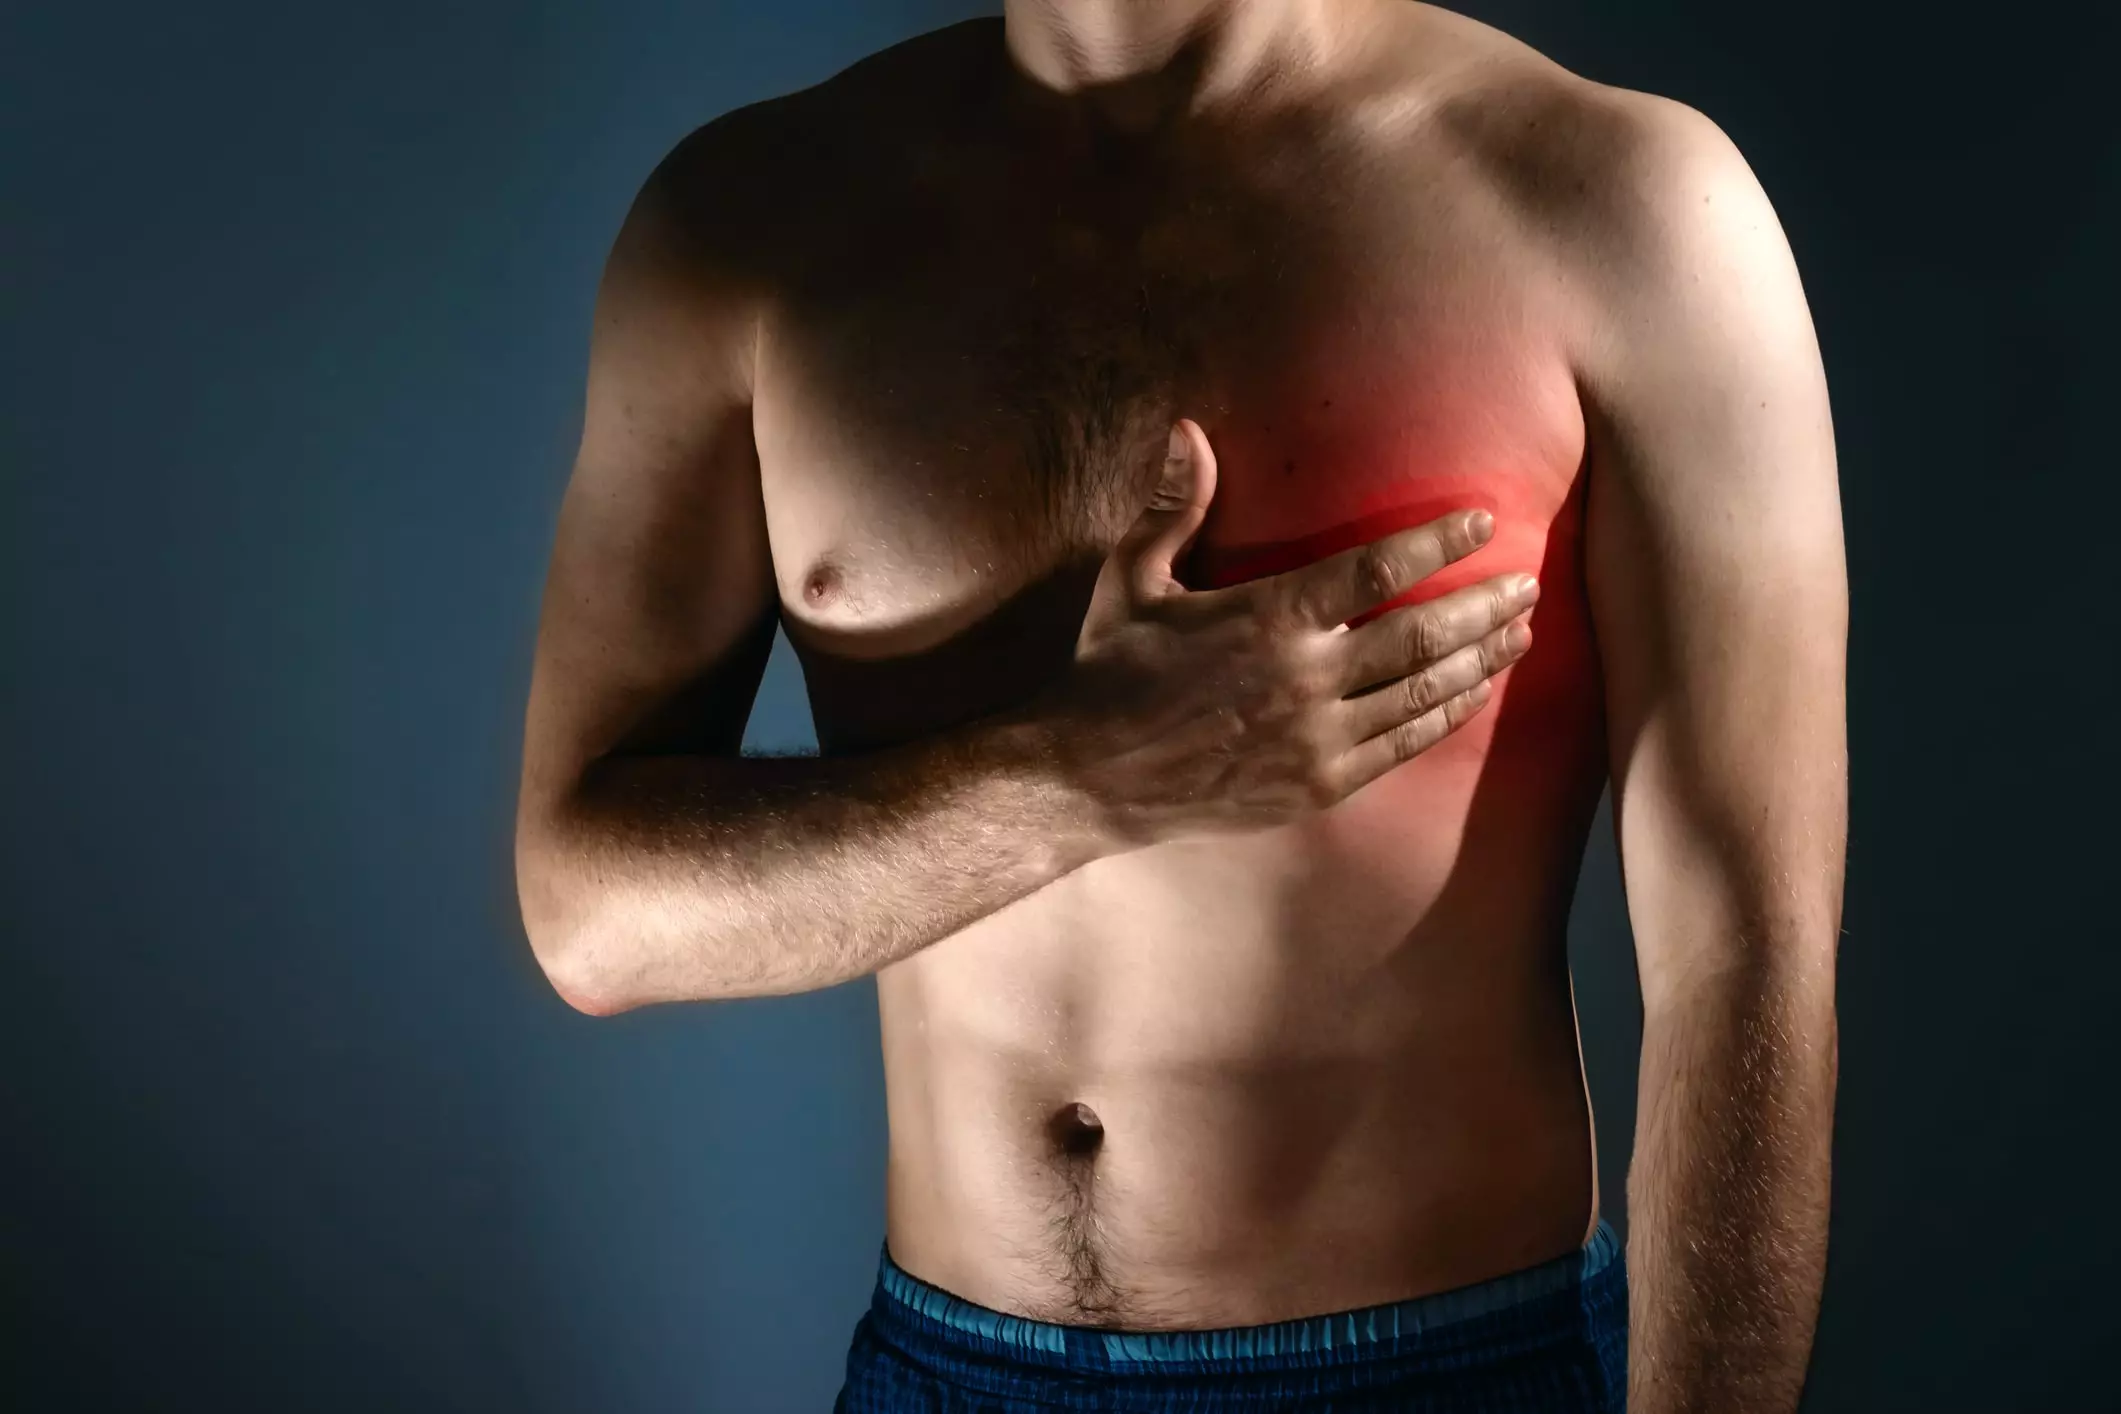 Pectoral muscle pain: Cause, Symptoms, Treatment, Exercise